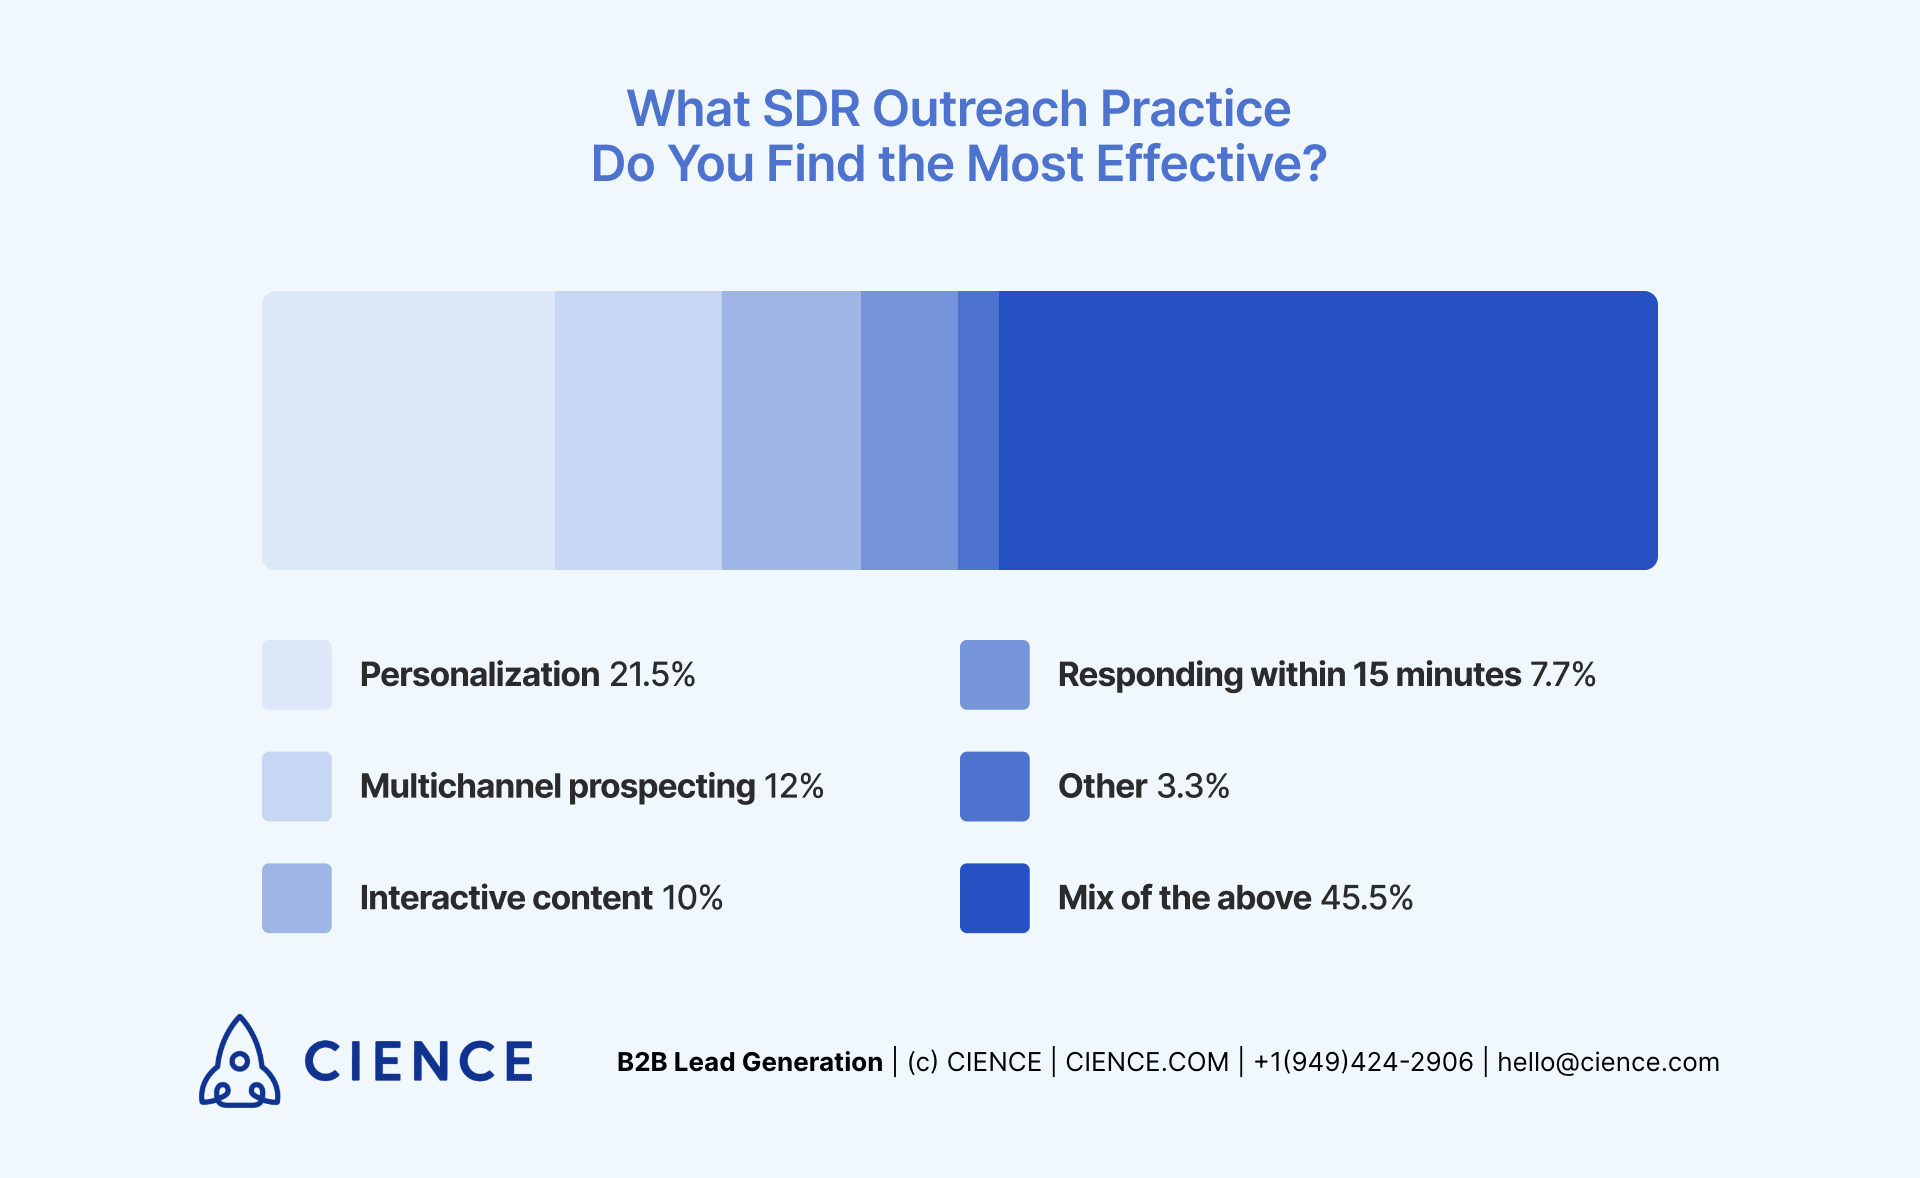 Most Effective SDR Outreach Practice